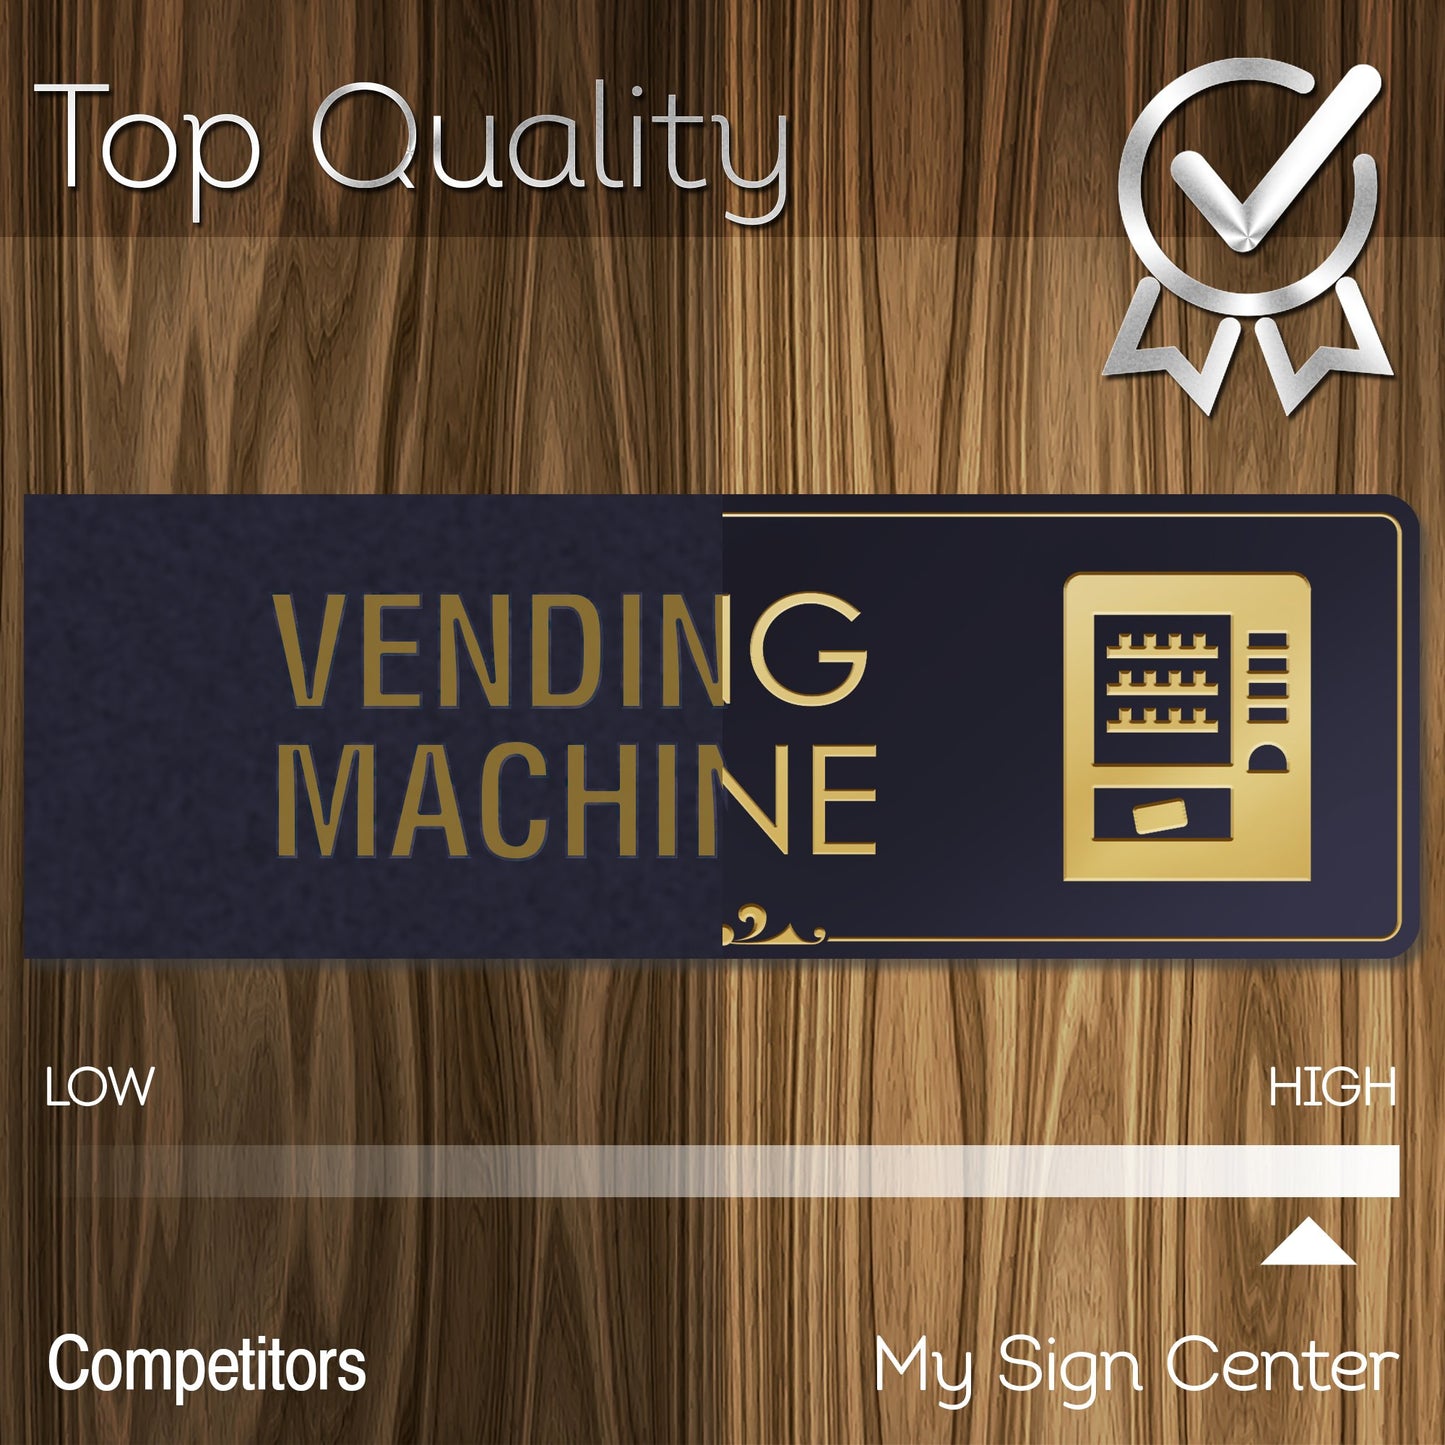 Vending Machines for Business Lunch Room Sign